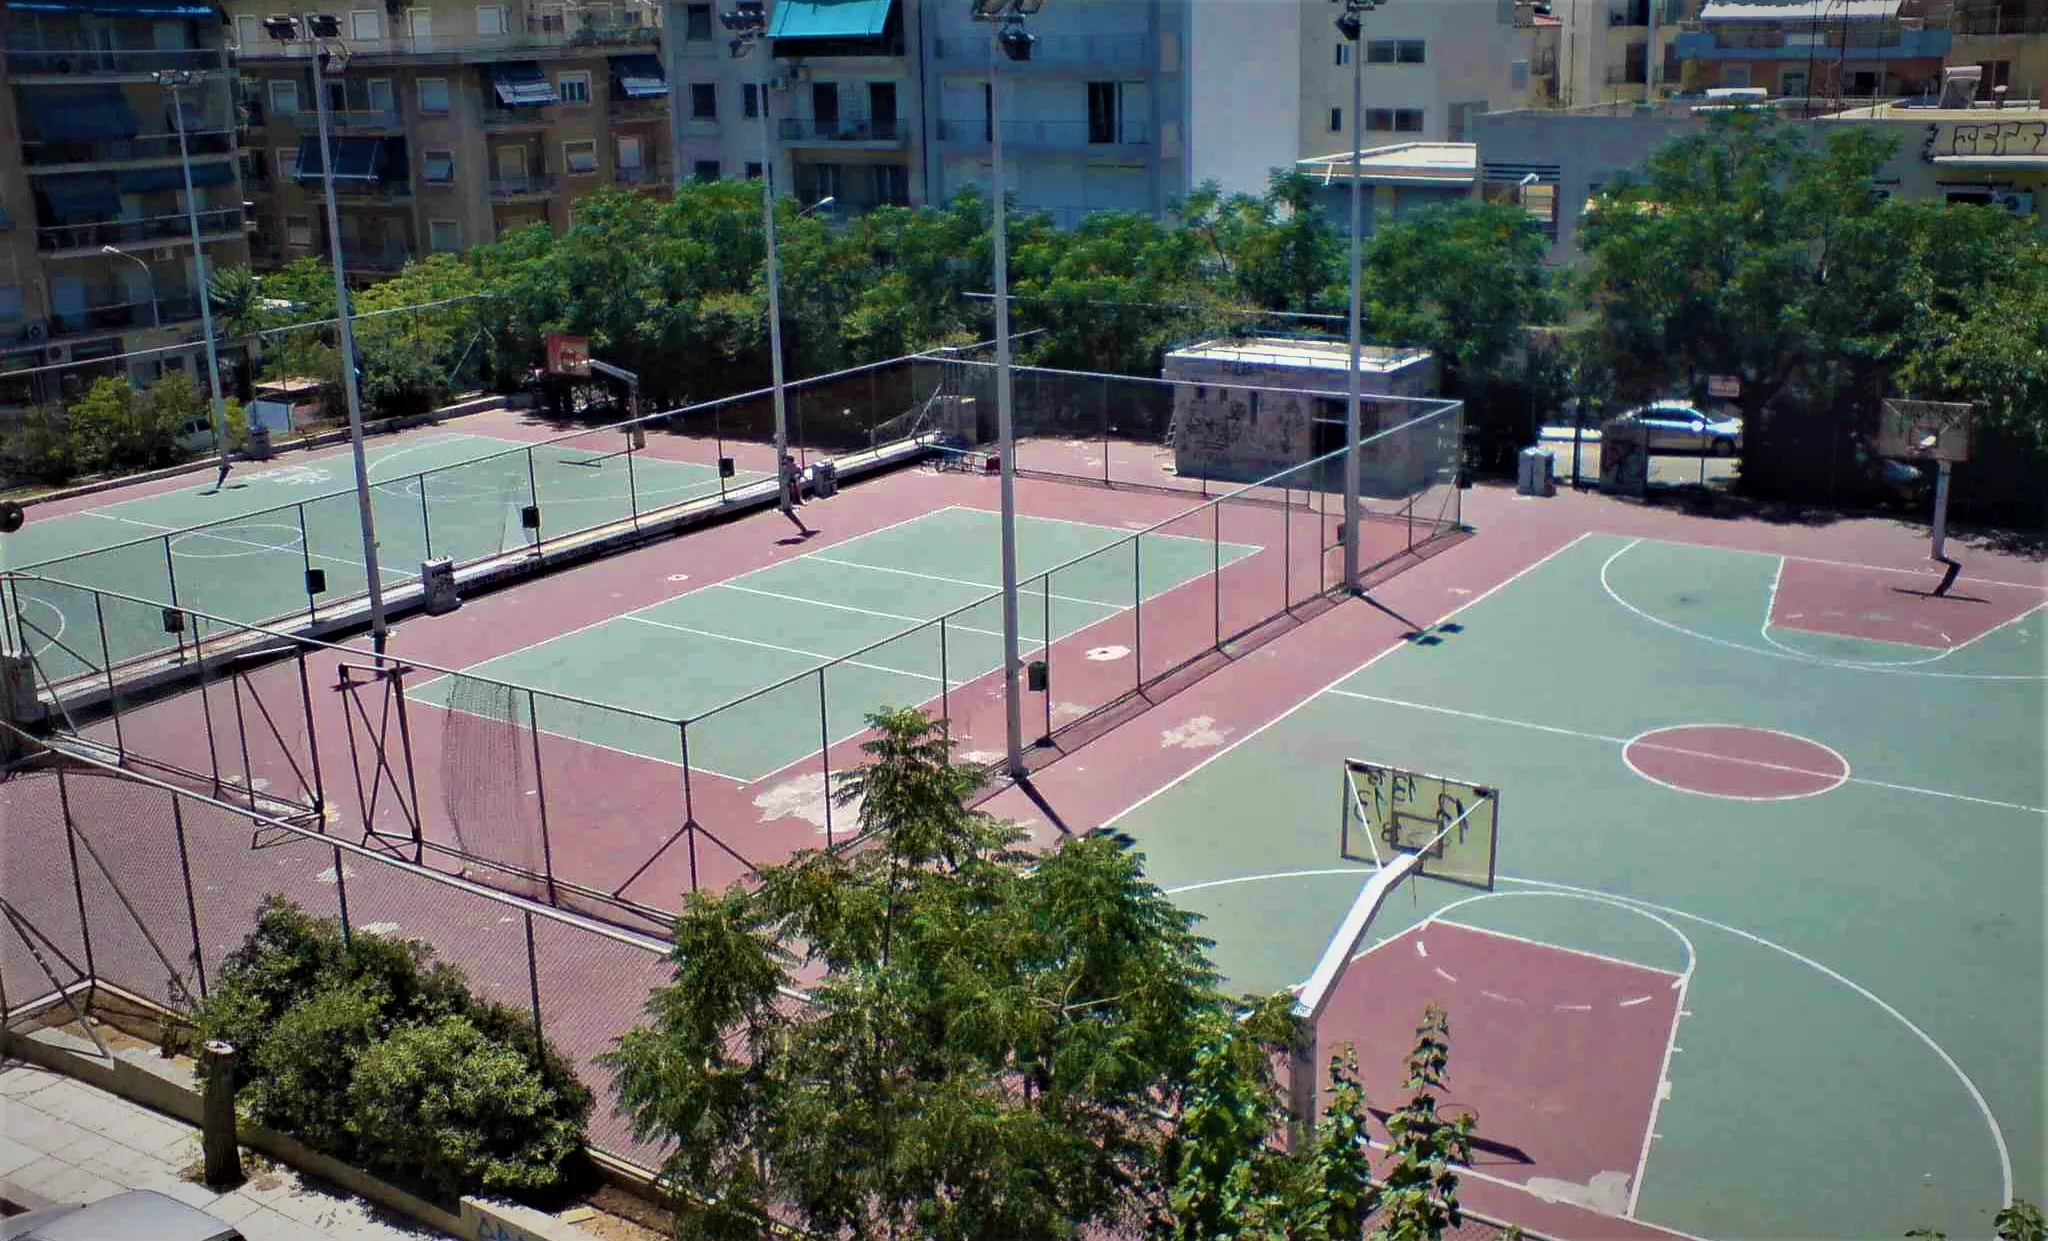 Basketball Volleyball courts in Greece, Europe | Volleyball - Rated 0.7